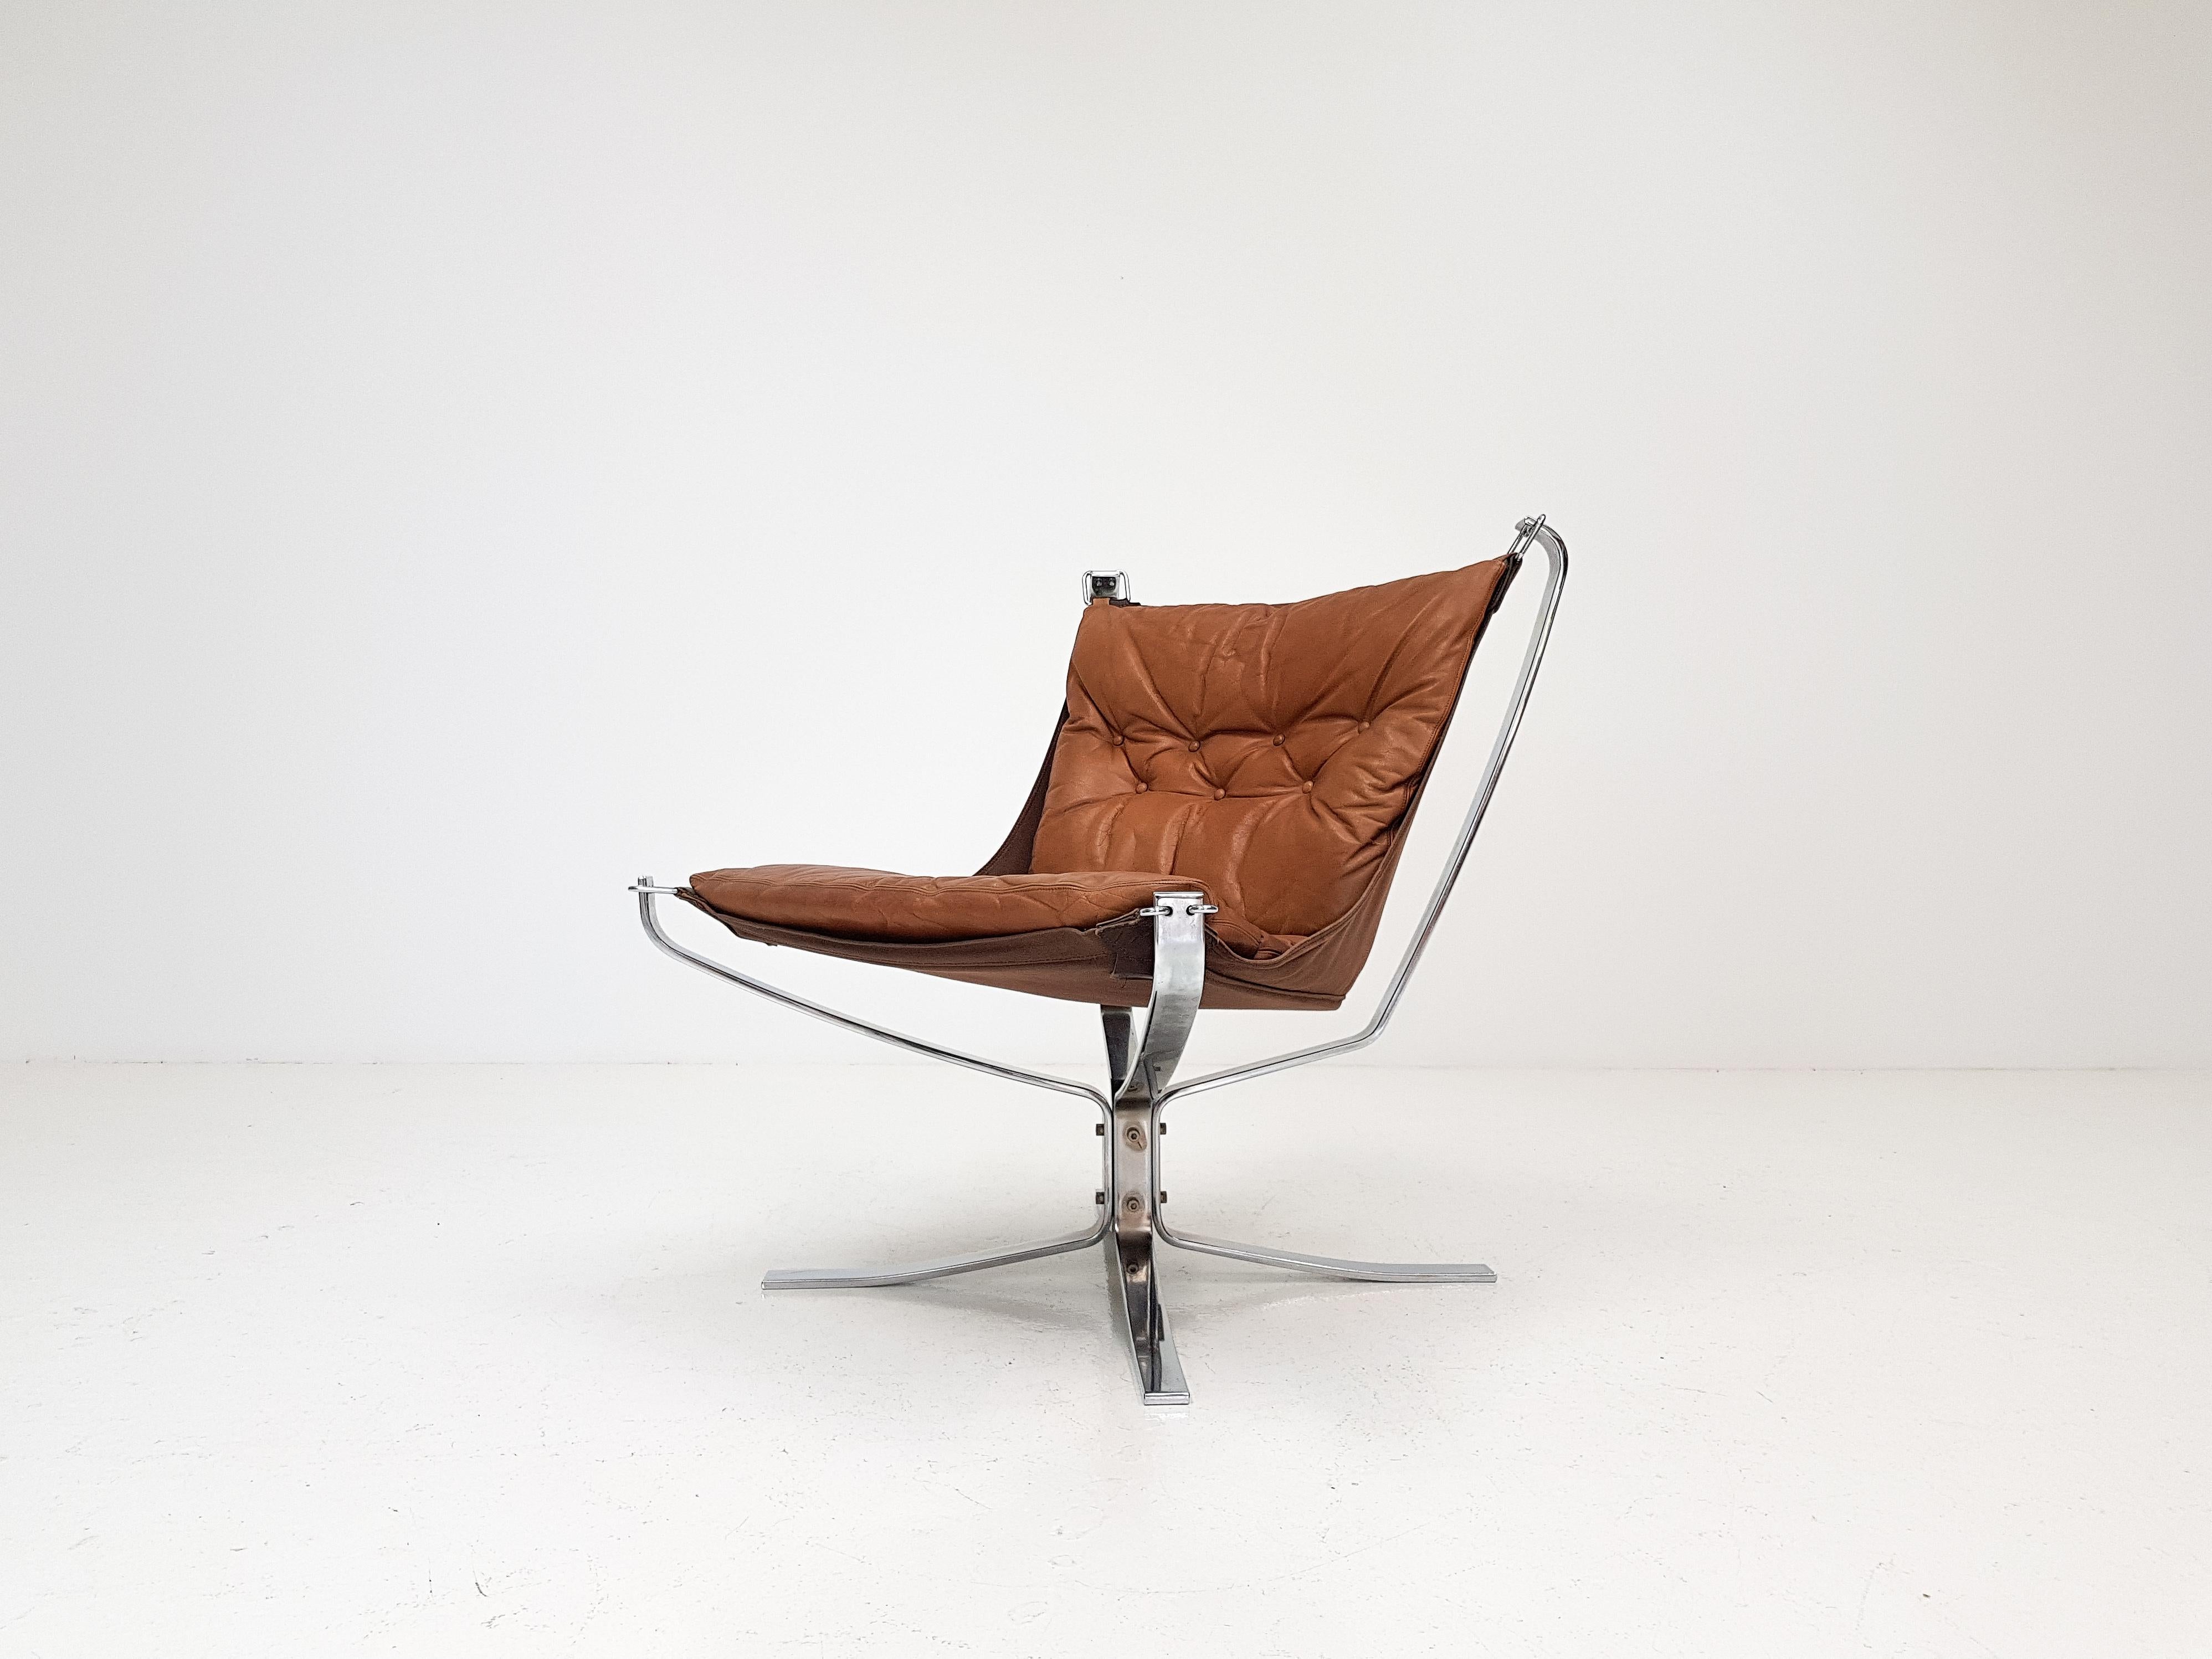 Chrome Based Cognac Leather Sigurd Ressell Designed 1970s Falcon Chair, 1970s In Good Condition In London Road, Baldock, Hertfordshire